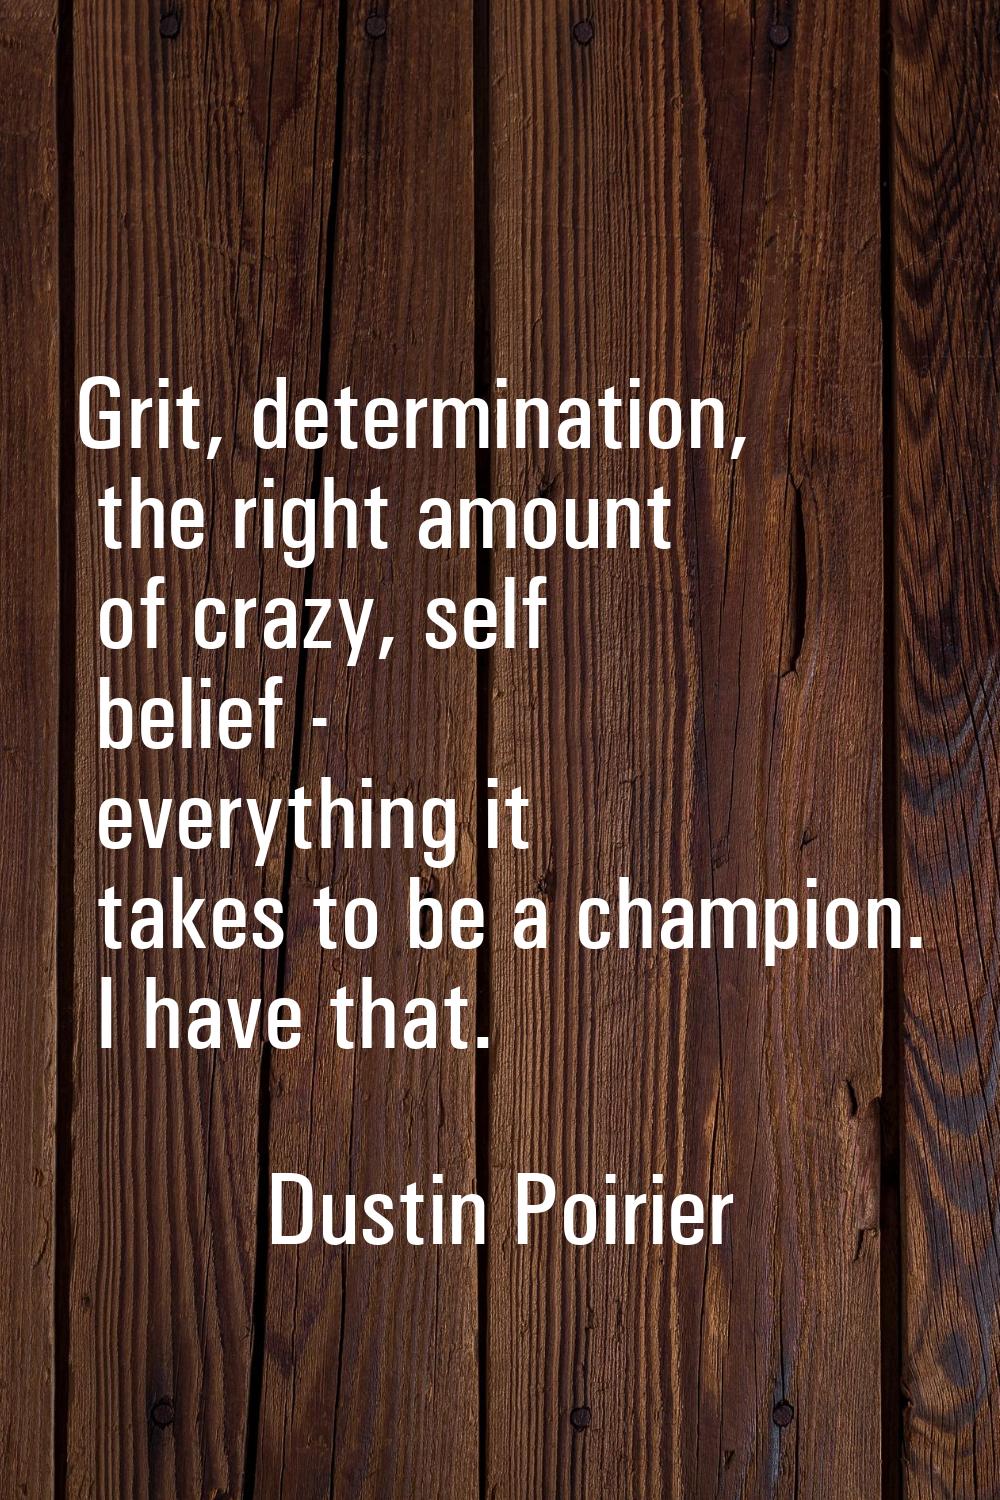 Grit, determination, the right amount of crazy, self belief - everything it takes to be a champion.